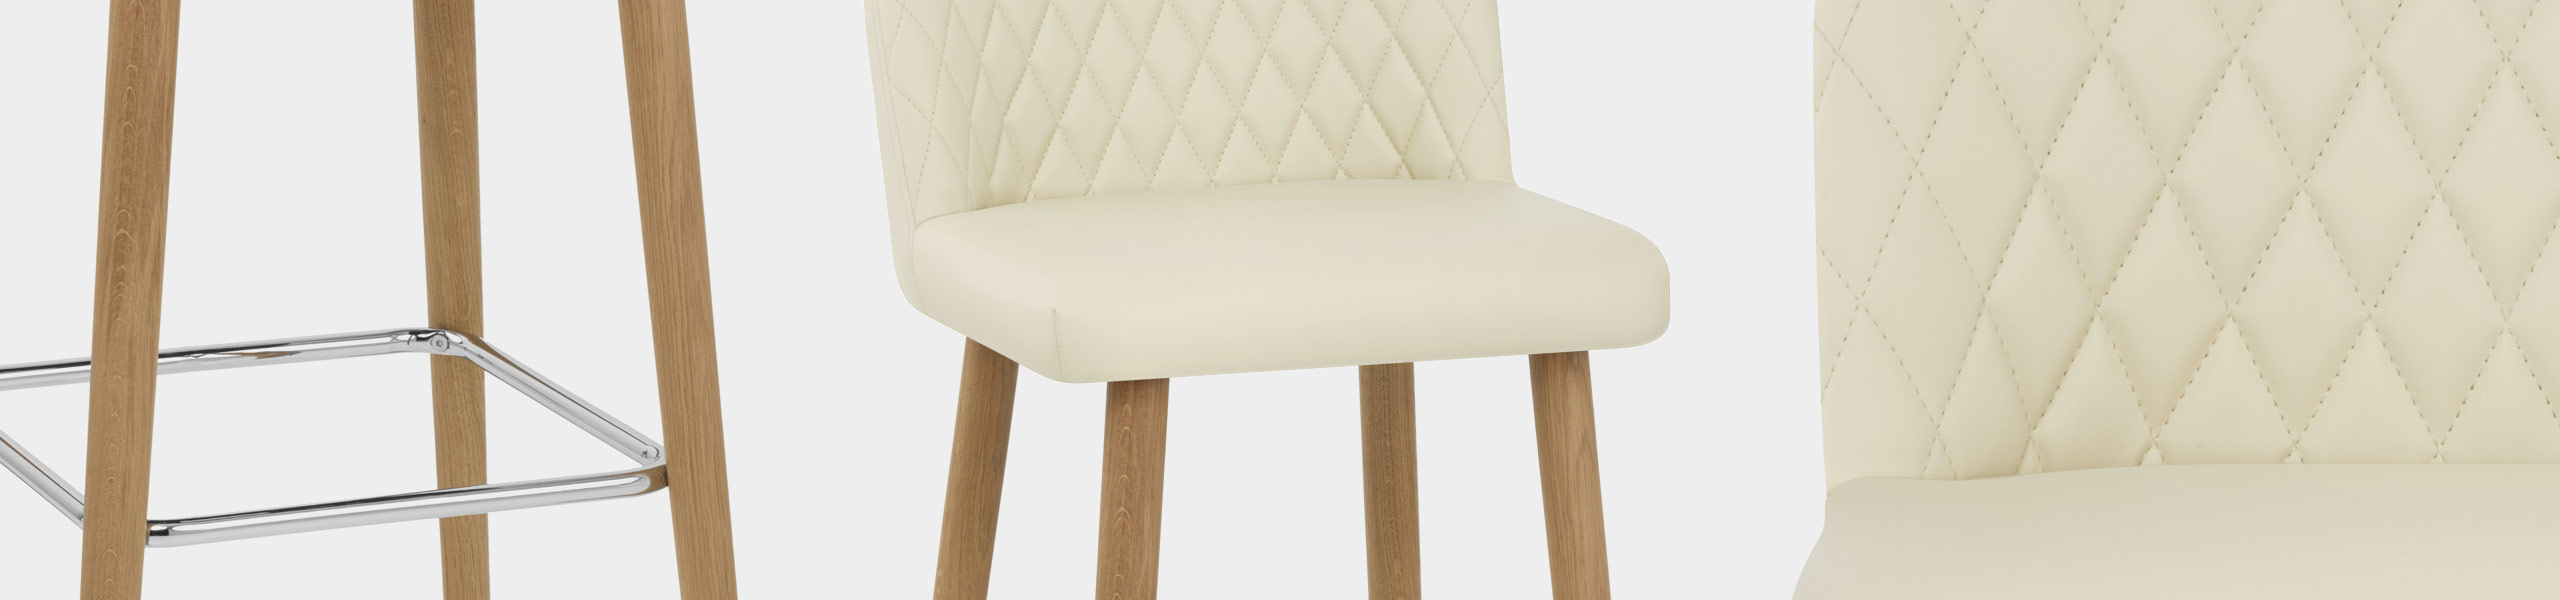 Pacific Wooden Stool Cream Video Banner